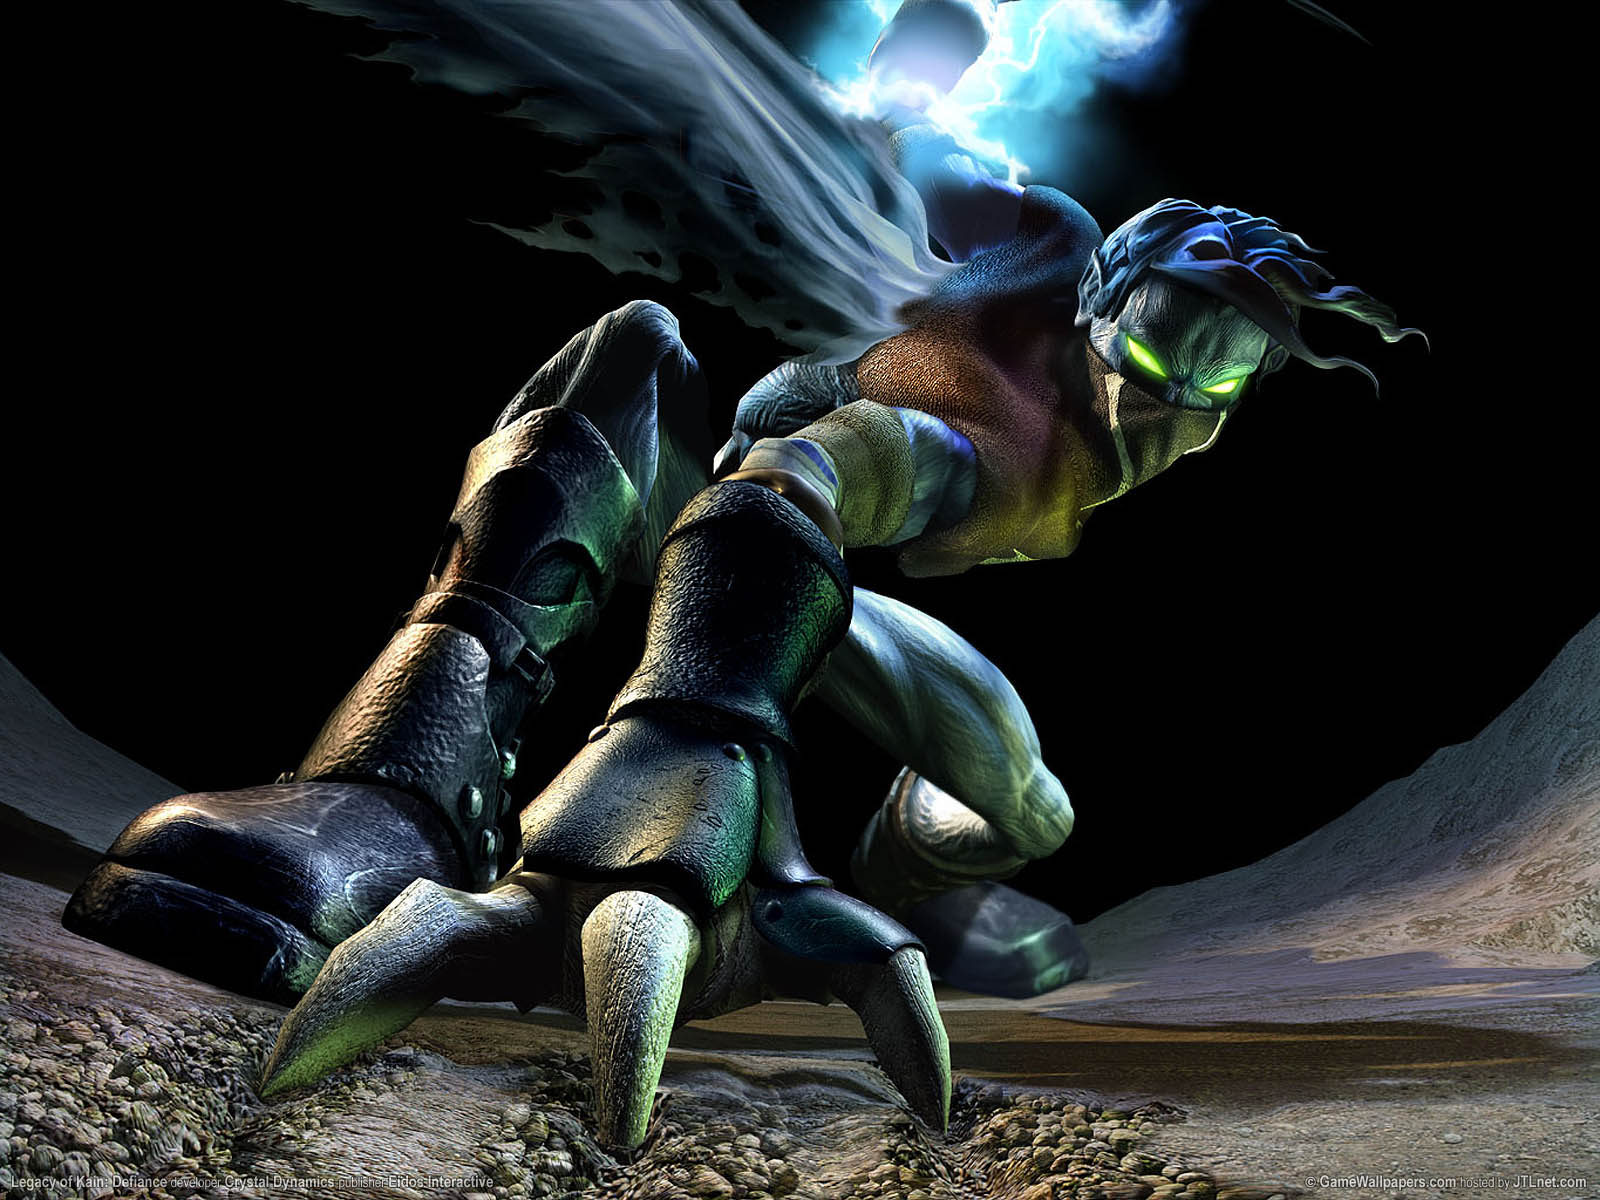 Legacy of Kain%253A Defiance achtergrond 03 1600x1200